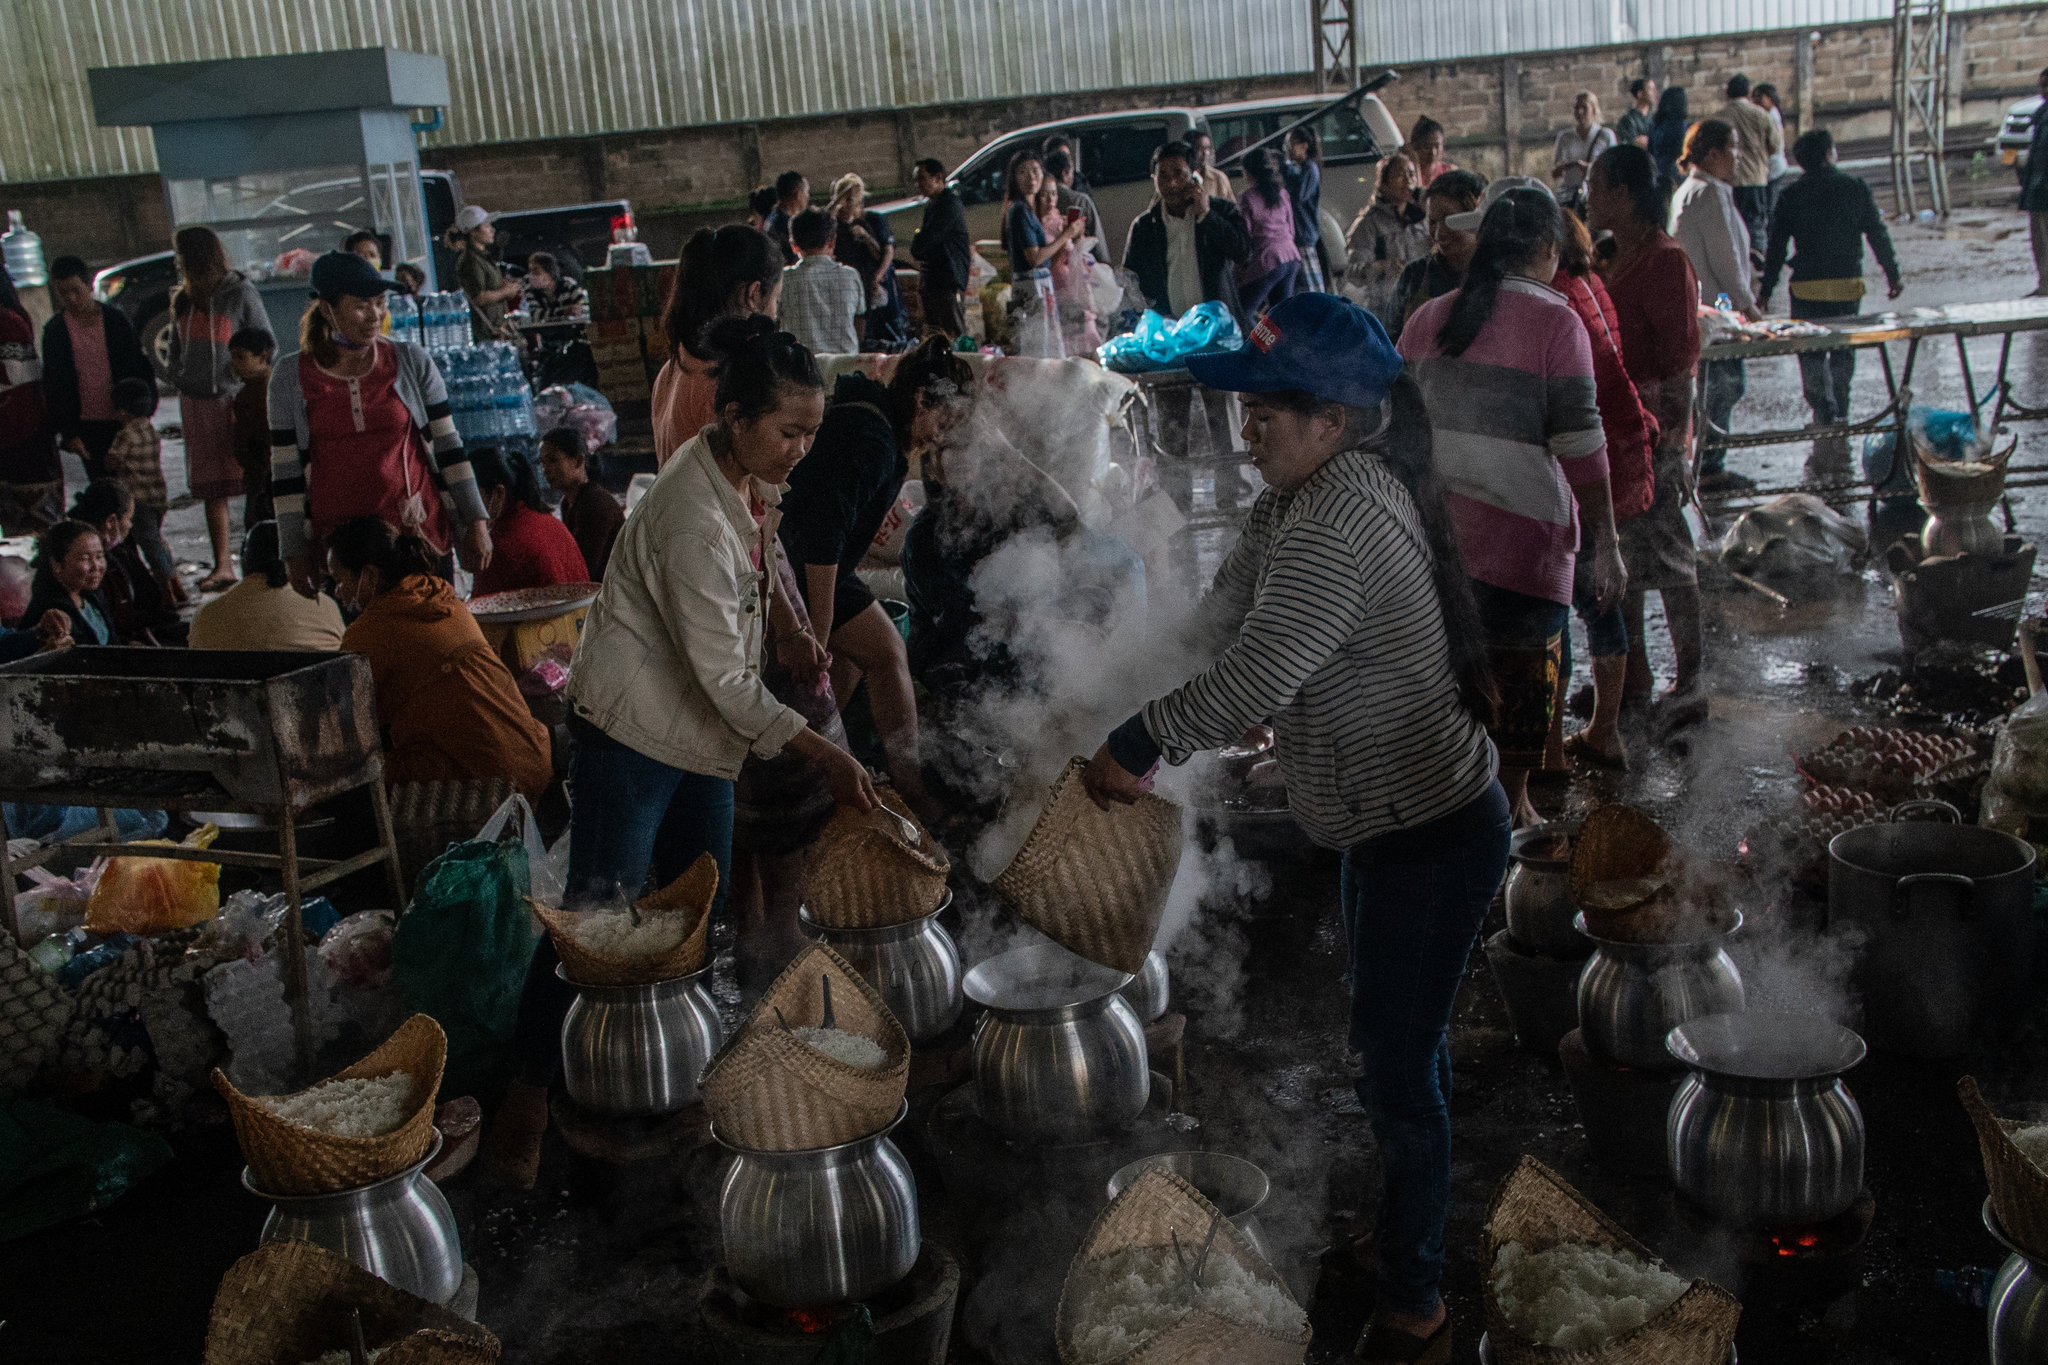 Volunteers preparing rice for people displaced by the dam collapse.CreditBen C. Solomon/The New York Times